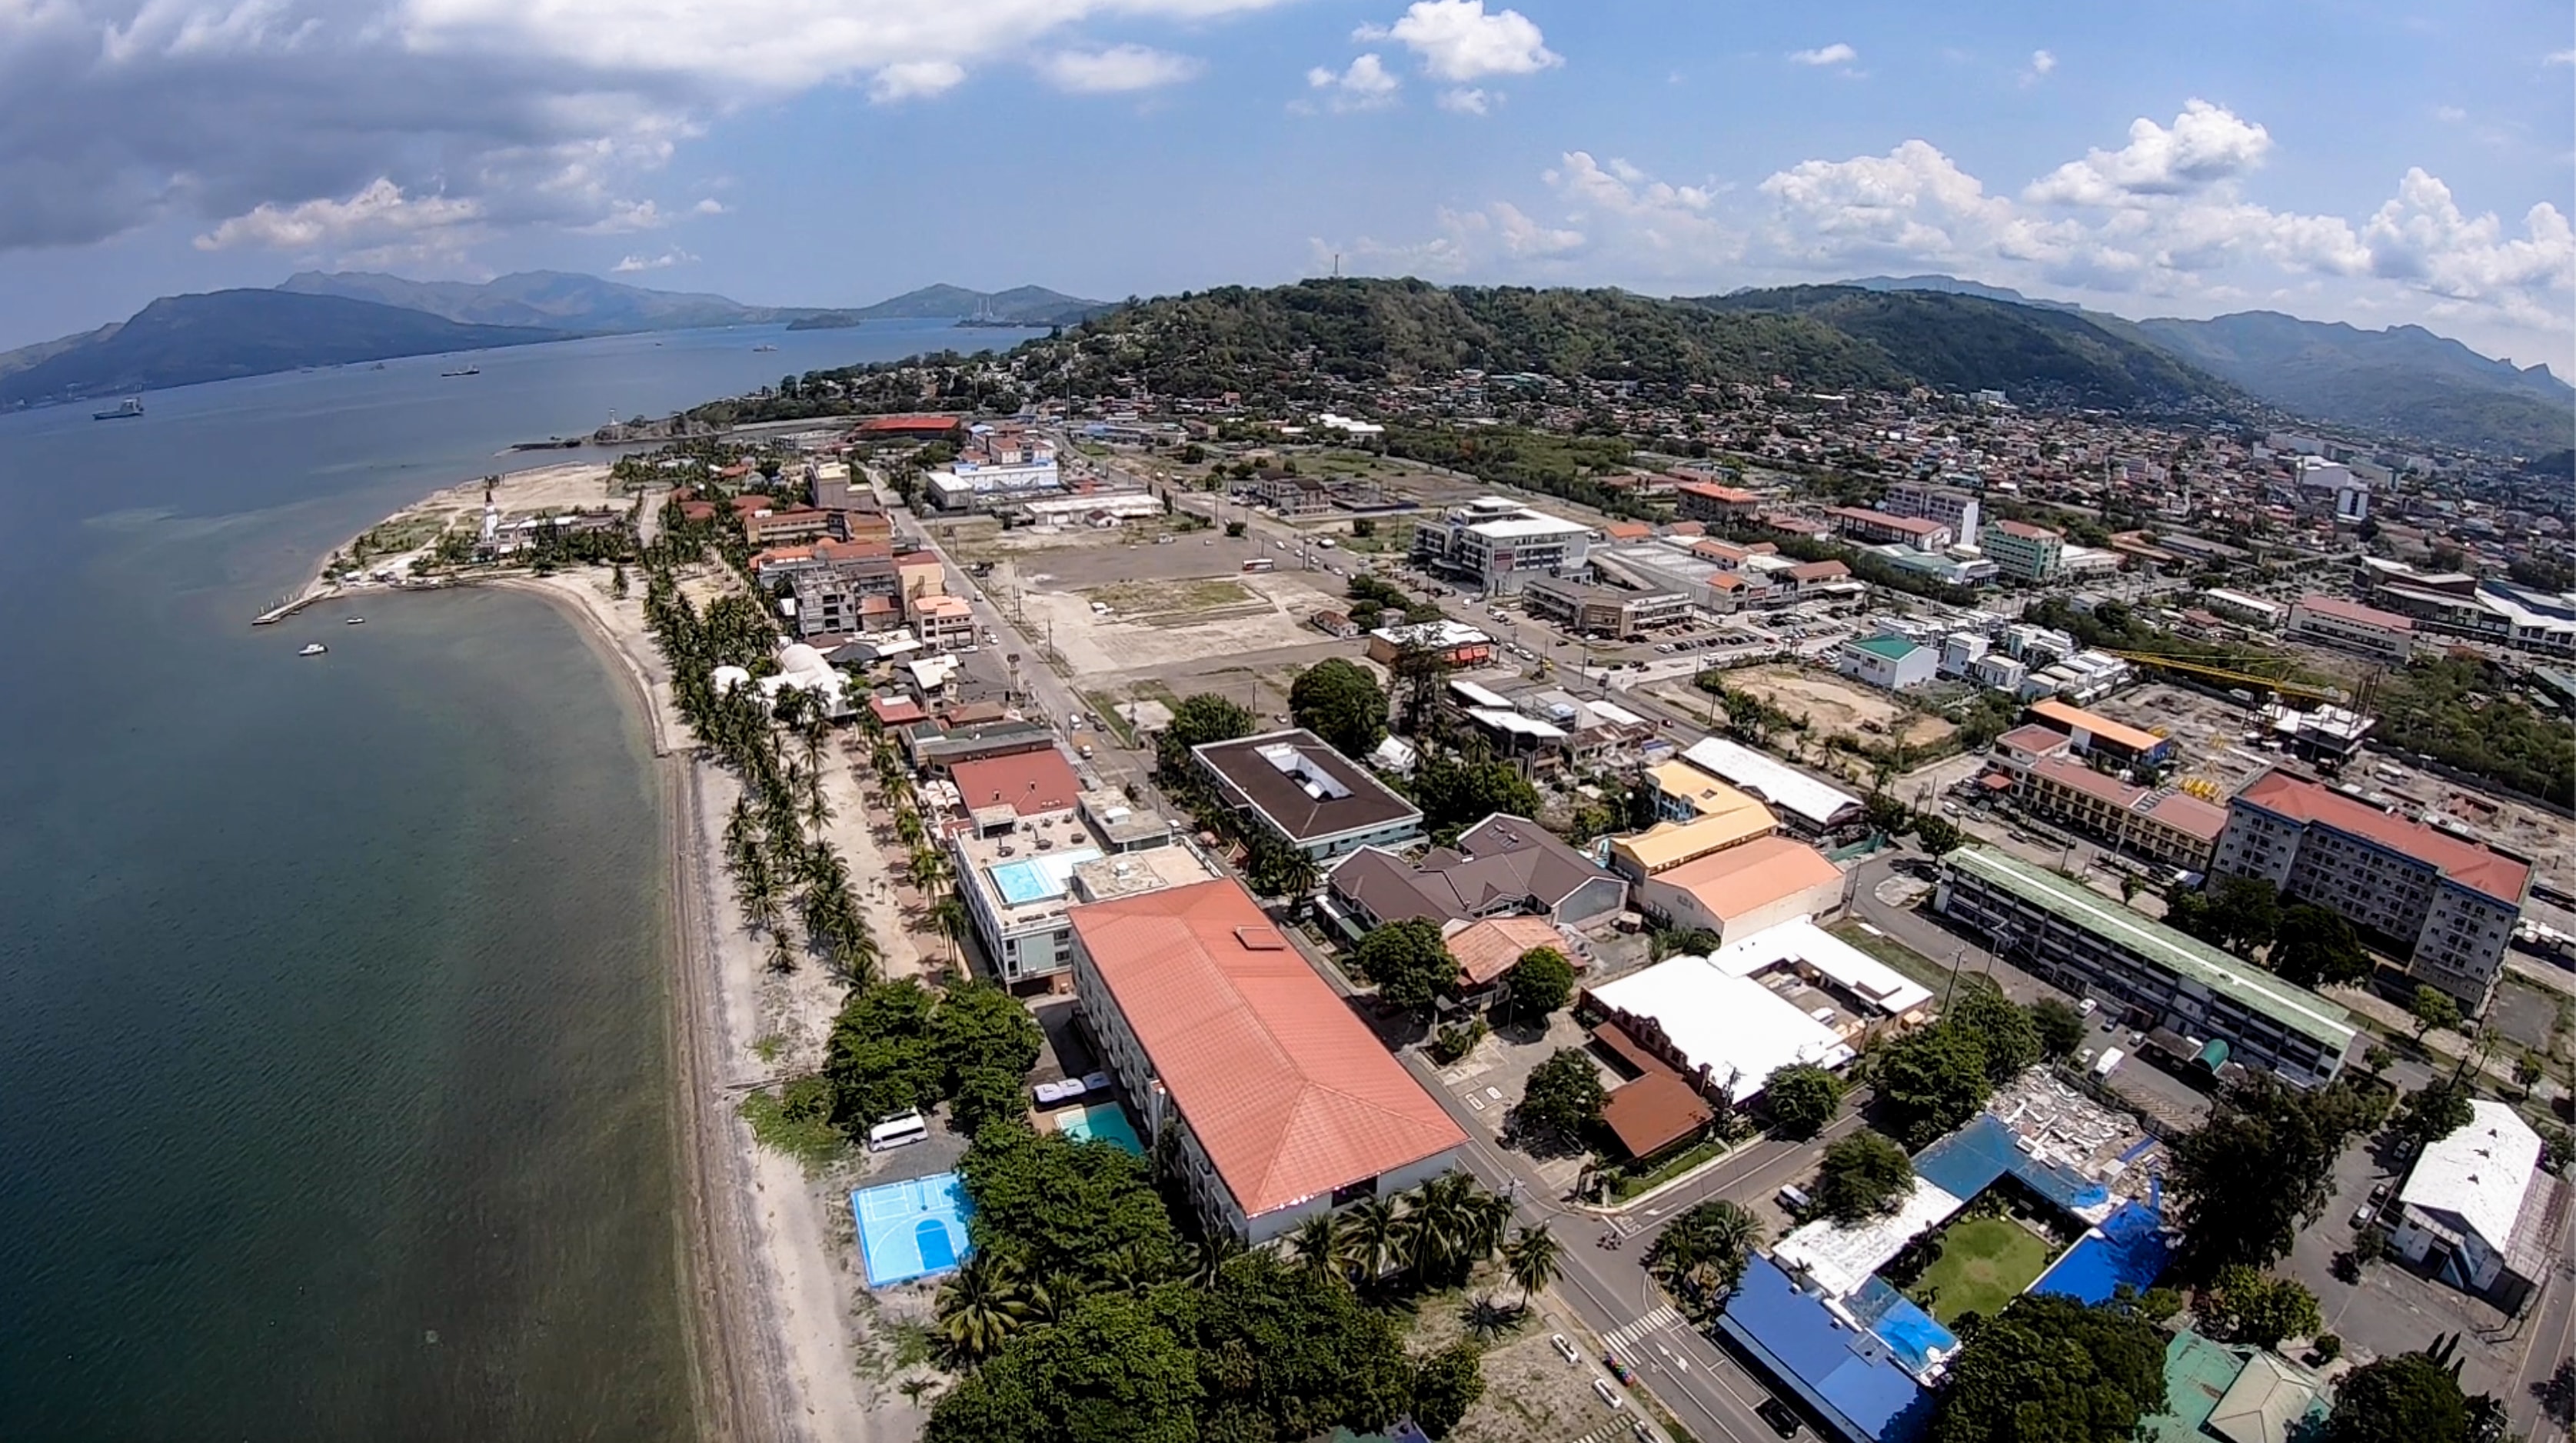 drone shot of subic bay freeport zone in zambales philippines